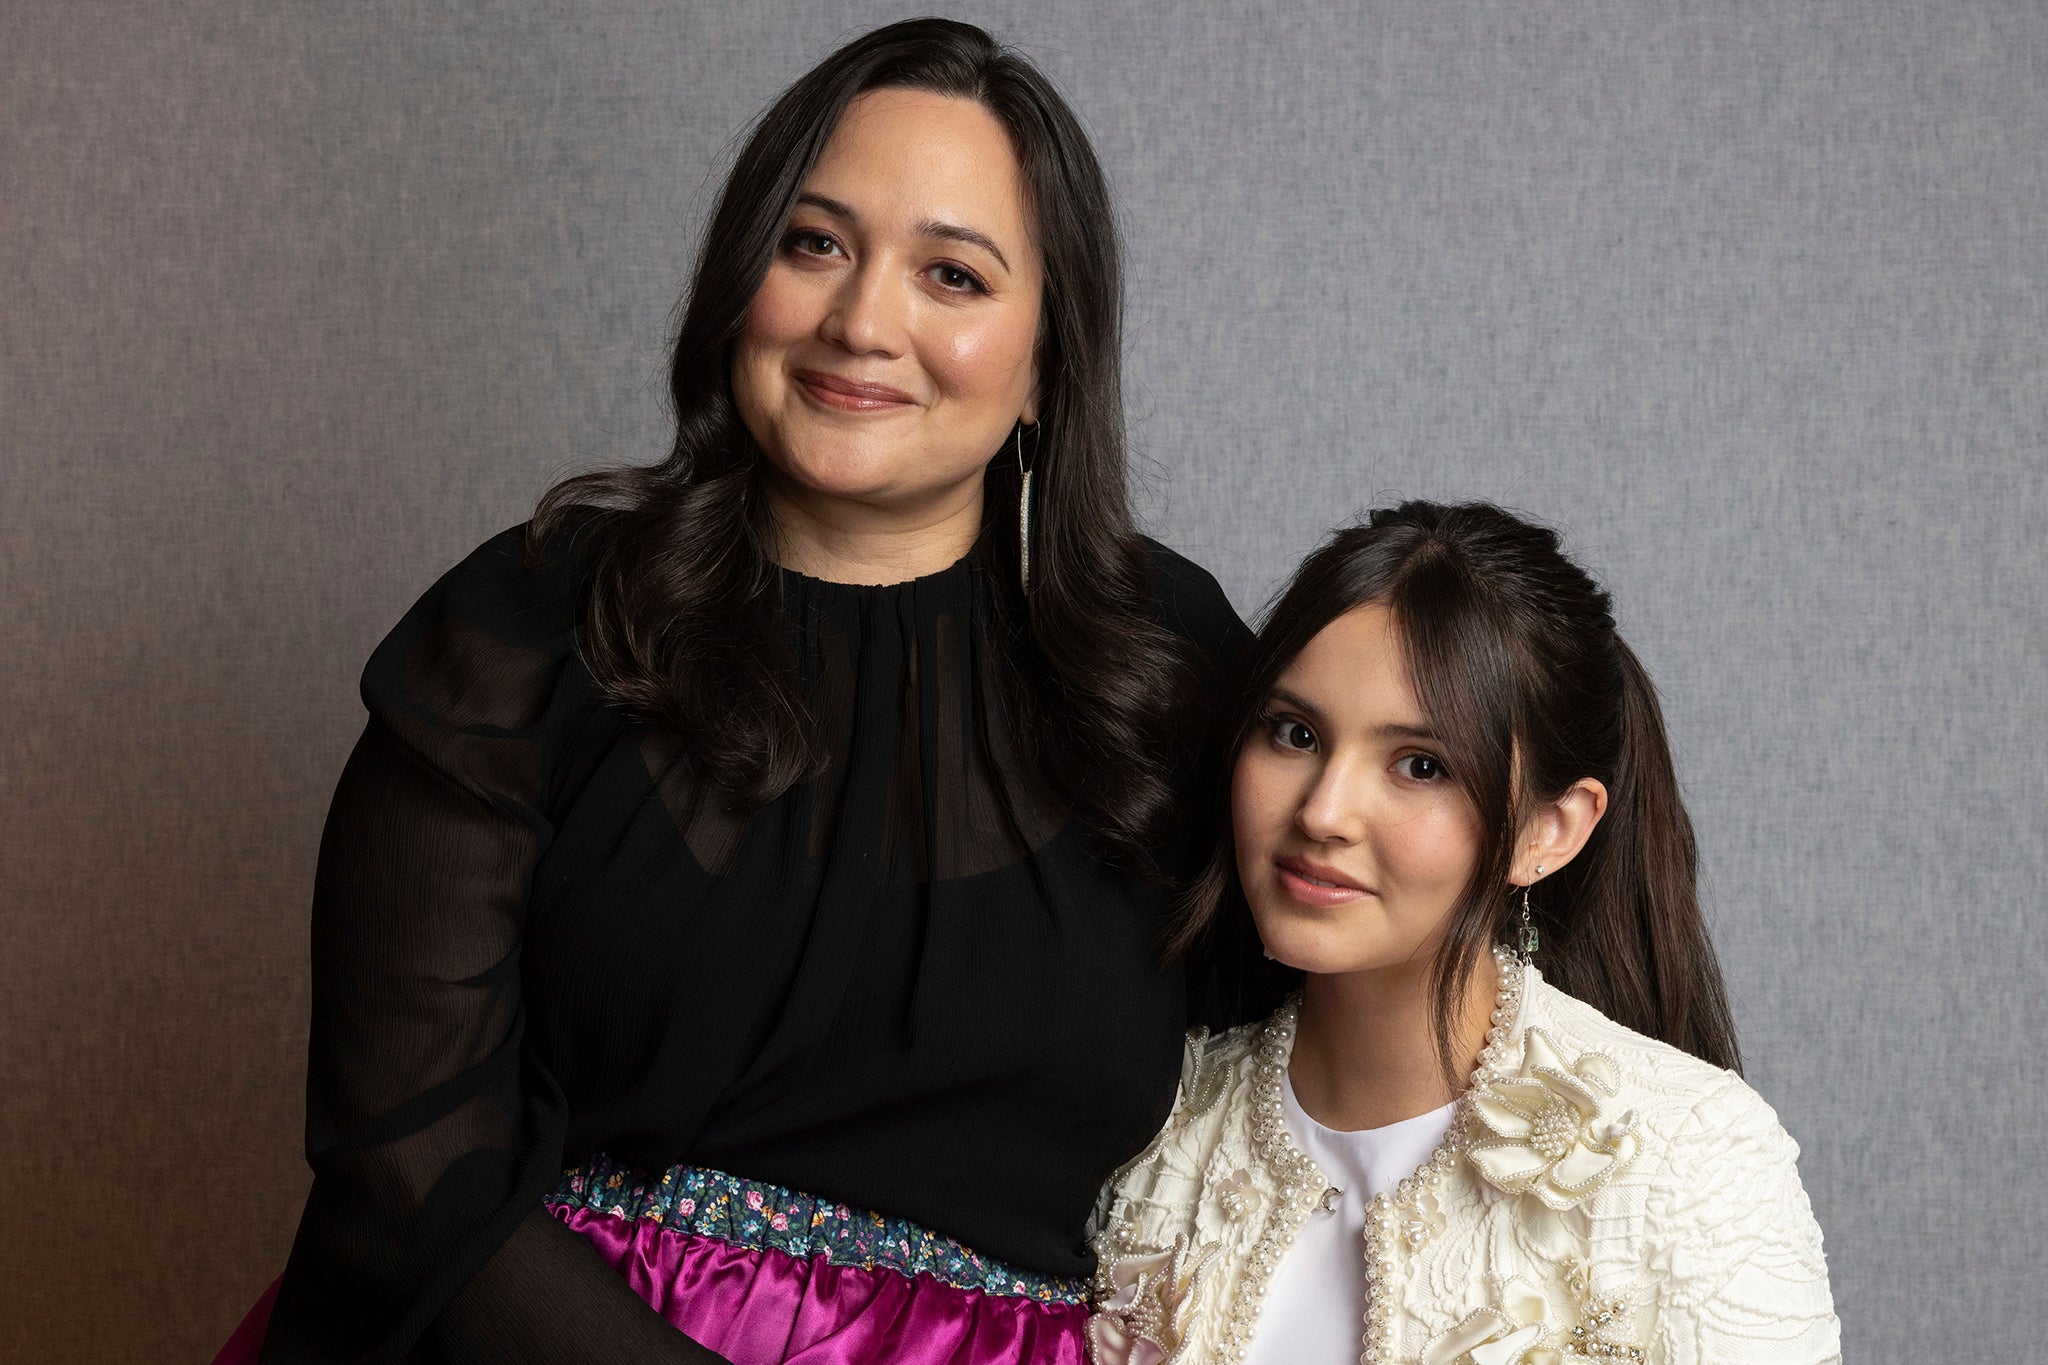 ‘No one deserves it more than her’: Actors Lily Gladstone and Isabel DeRoy-Olson